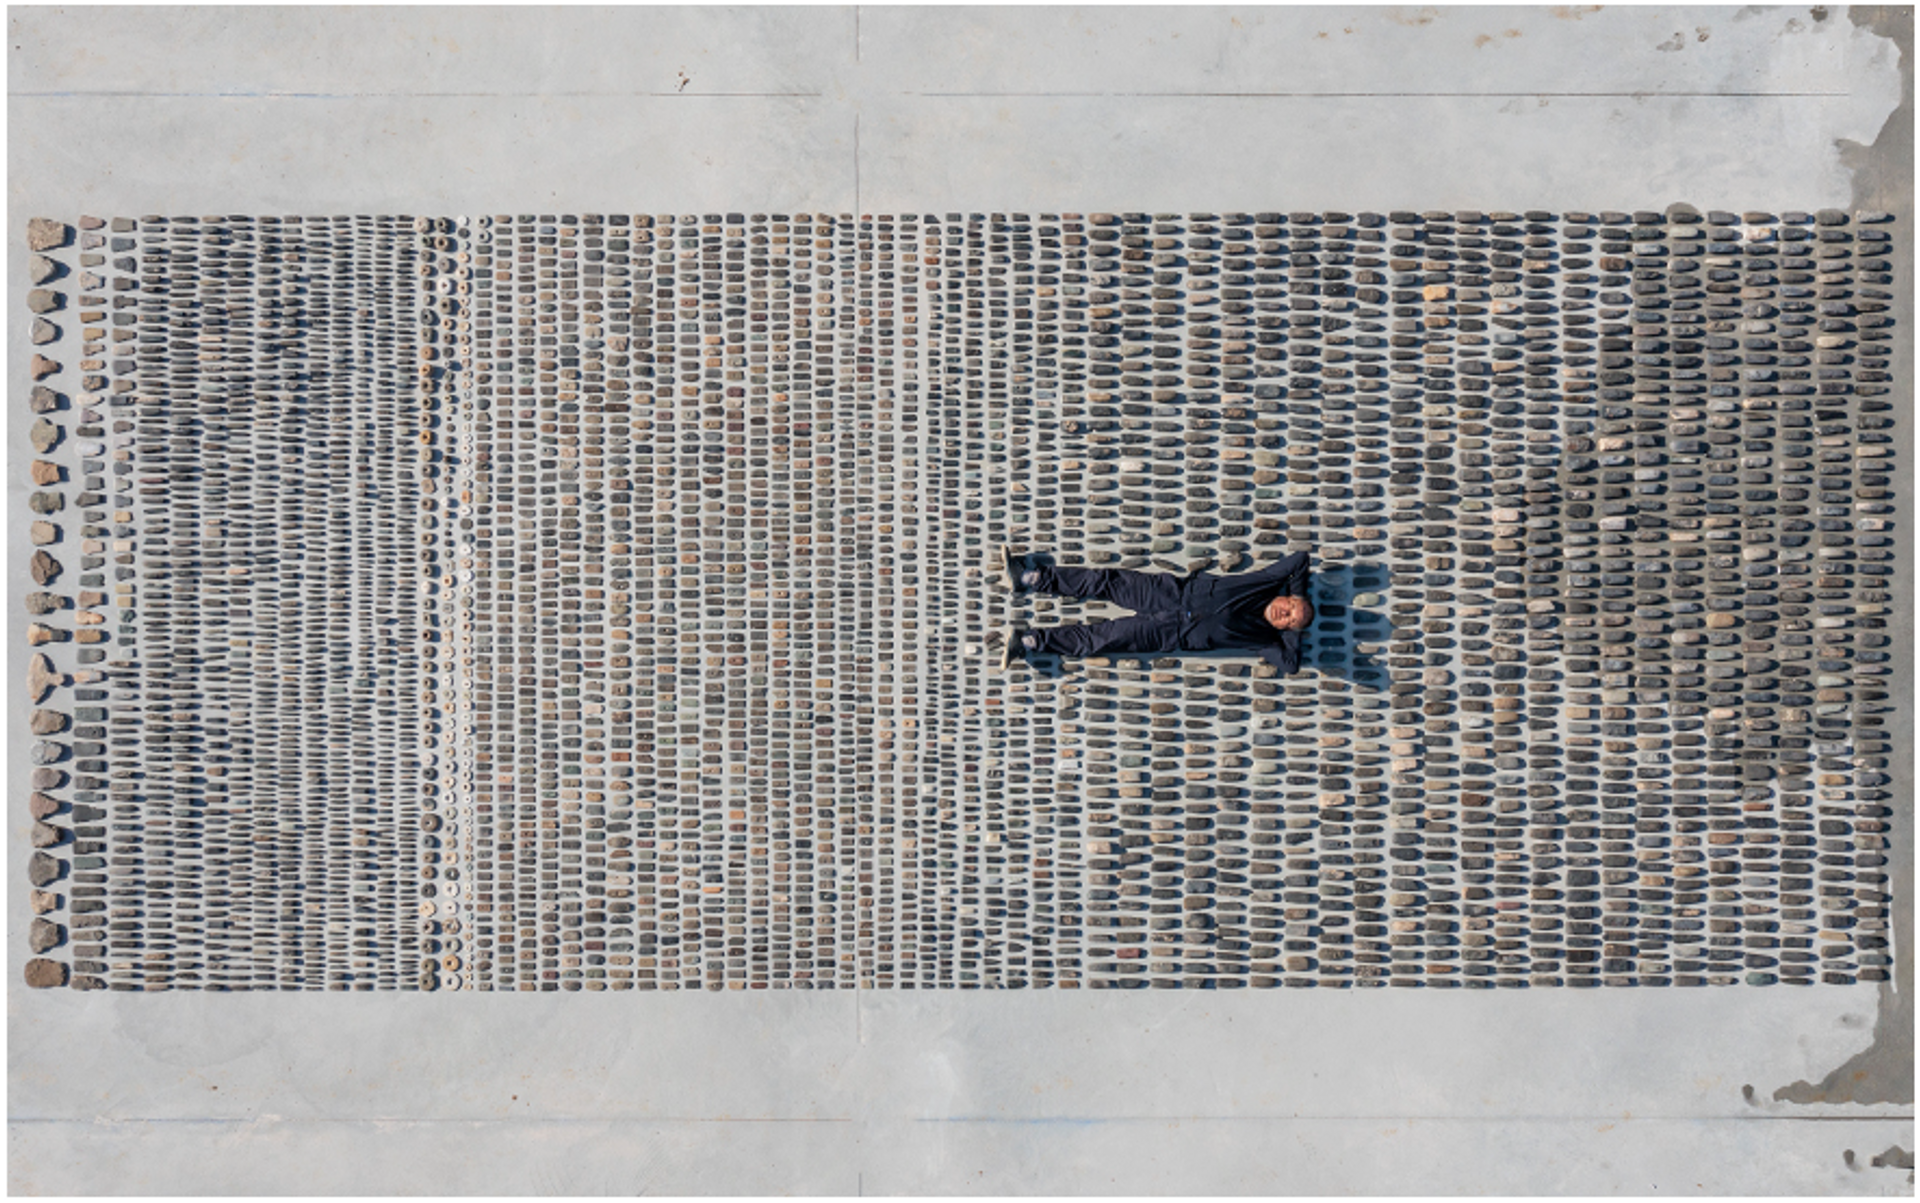 Bird's-eye view photograph of Ai WeiWei lying in the upper center of a vast collection of assembled and disassembled Chinese artifacts. His legs are spread apart, and his arms are positioned behind his head.